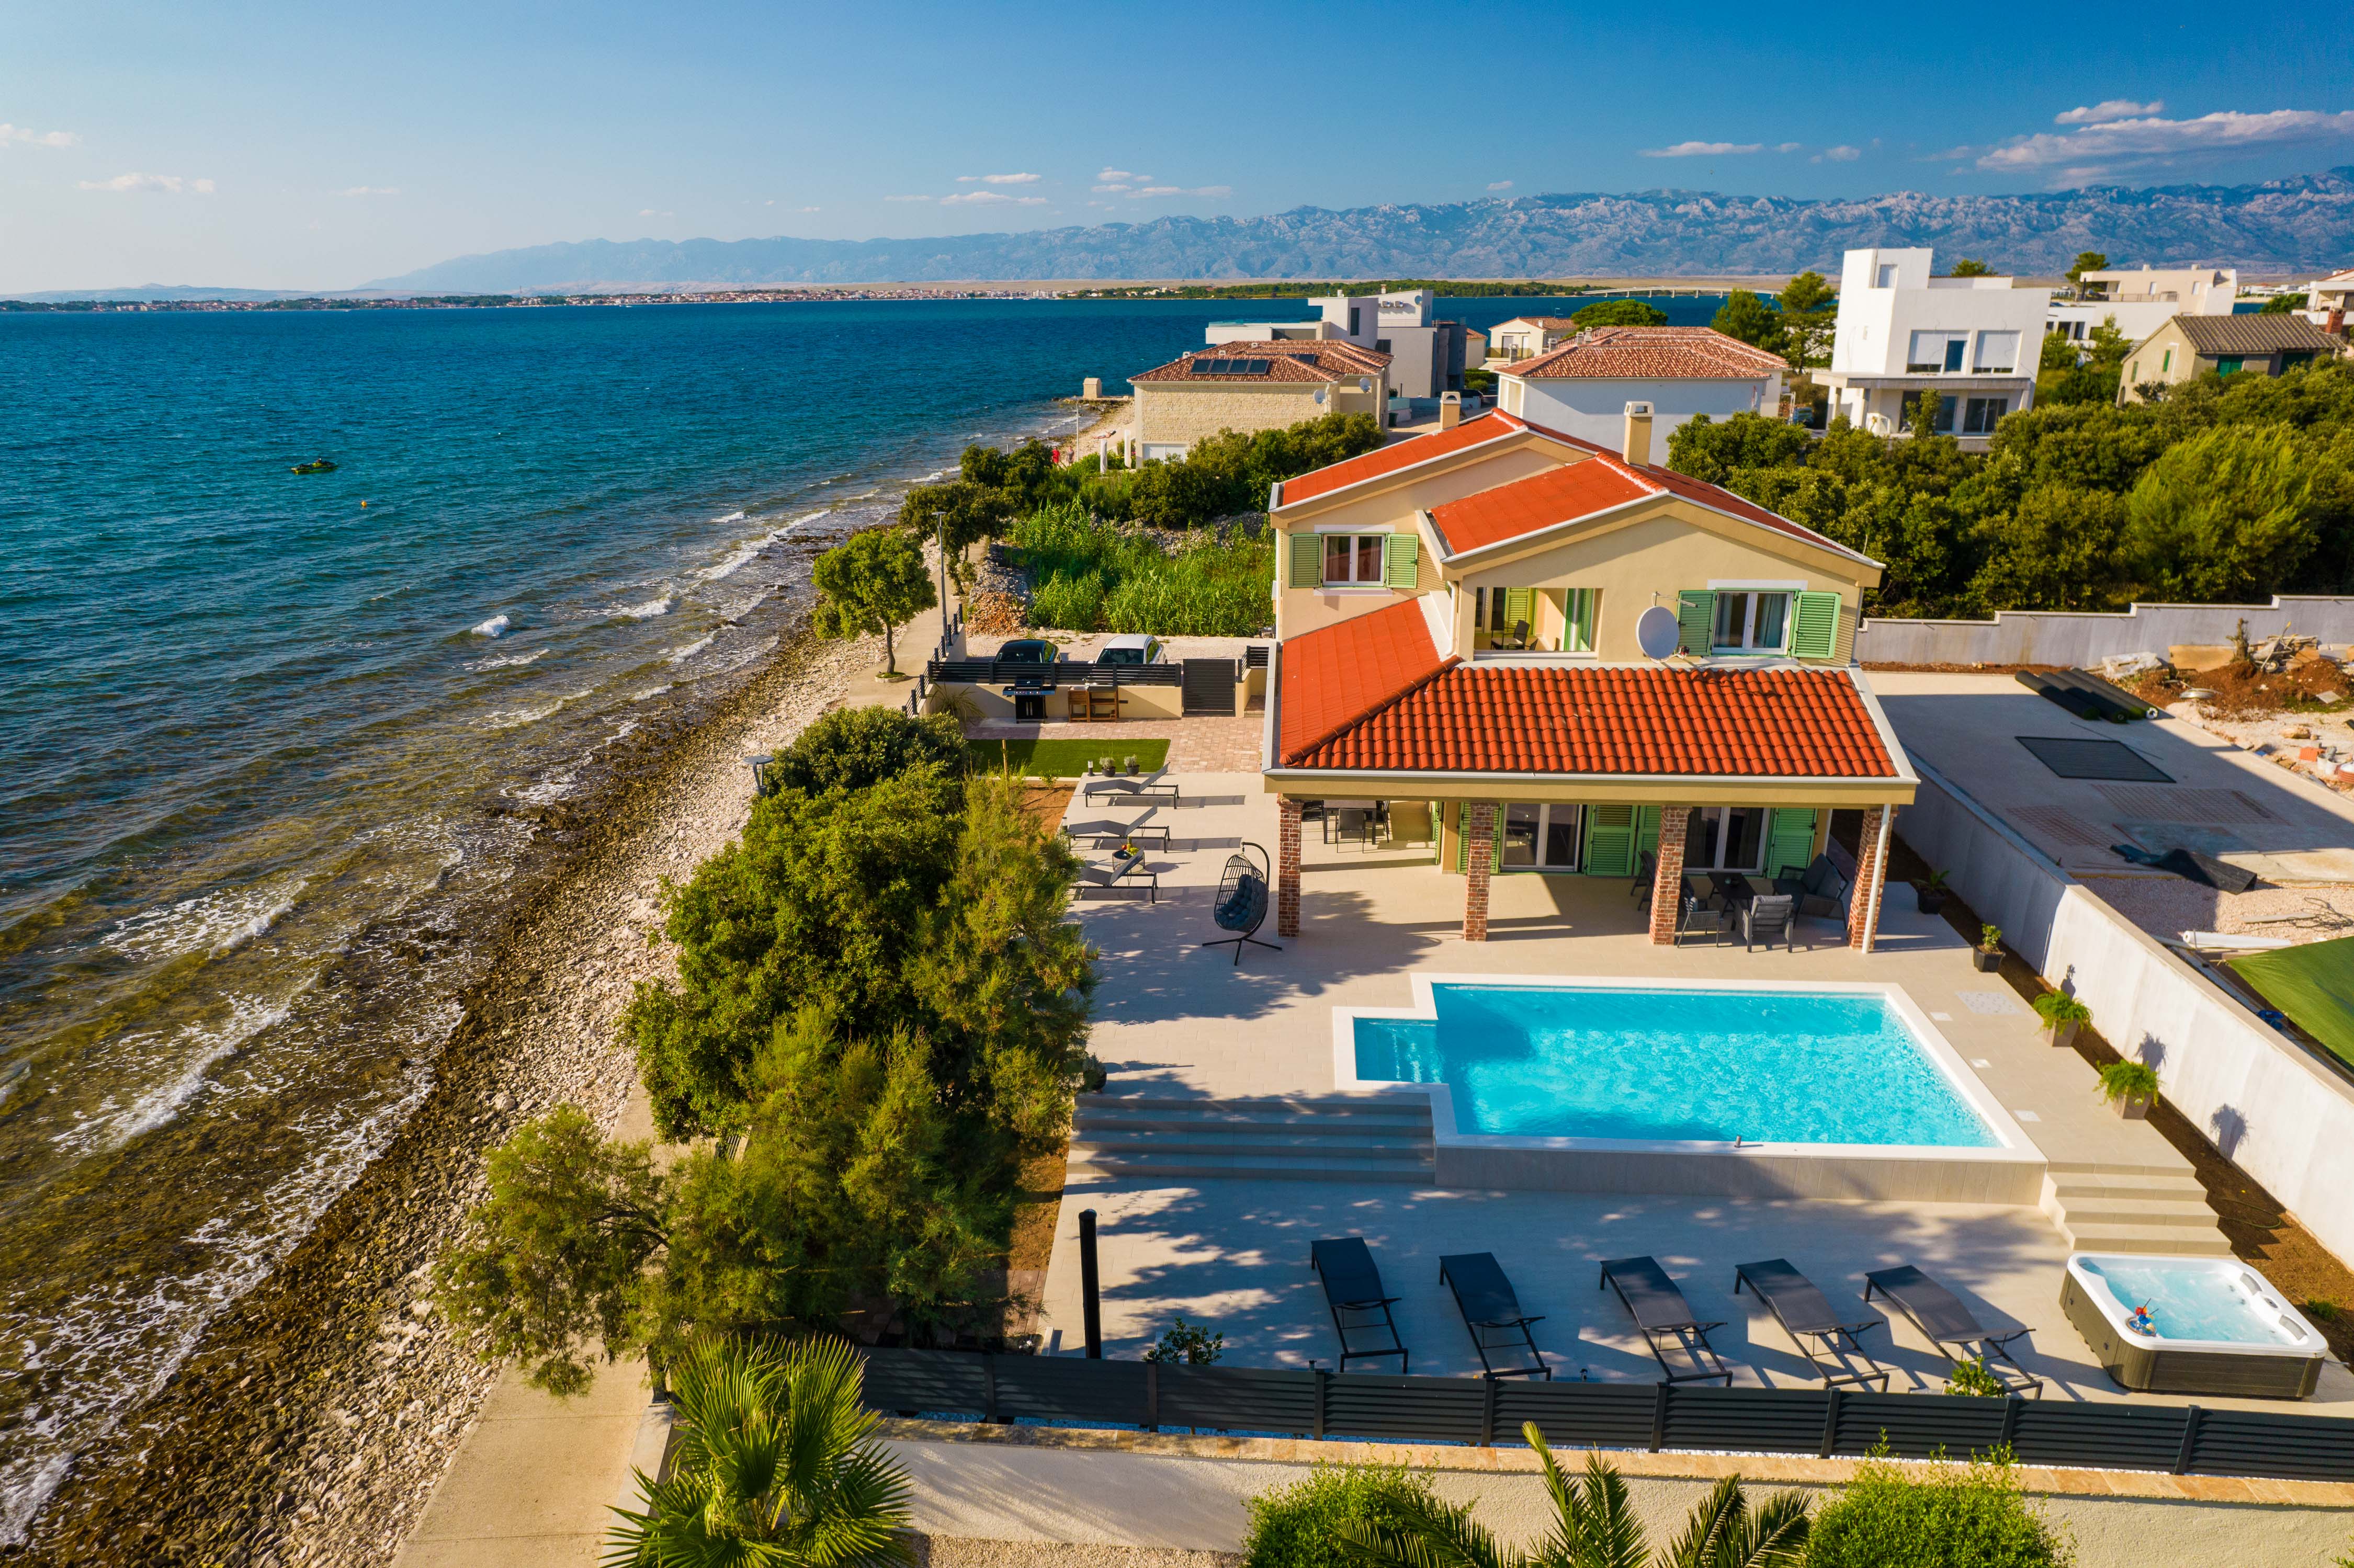 Beach front villa with heated pool, jacuzzi, fantastic view